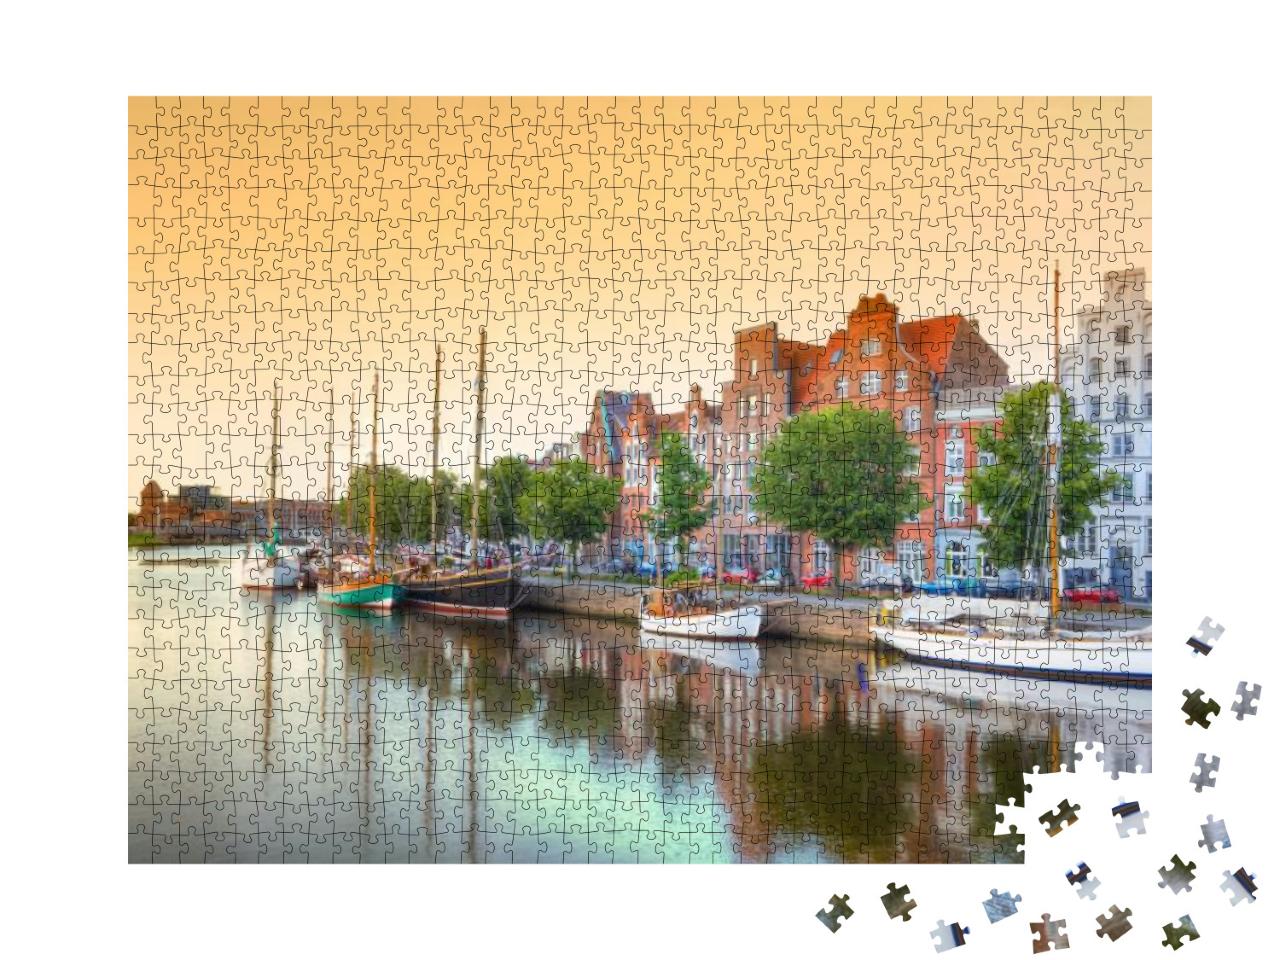 Luebeck At the River Trave, Germany... Jigsaw Puzzle with 1000 pieces